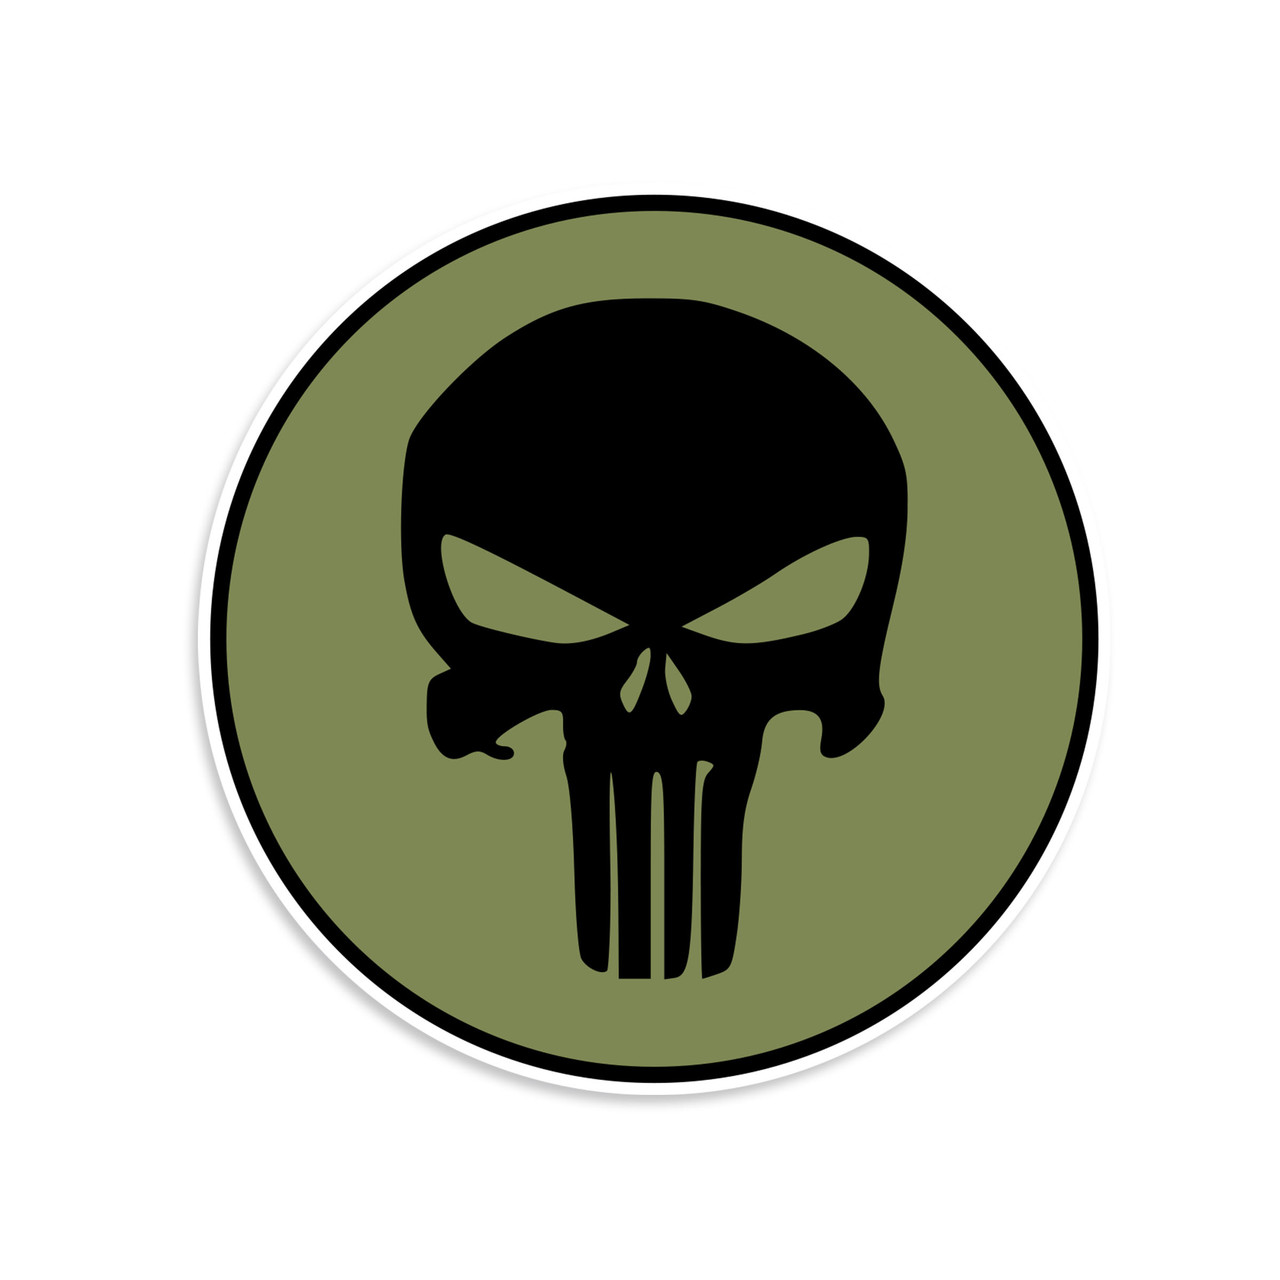 https://cdn11.bigcommerce.com/s-2qk6gvu0p8/images/stencil/1280x1280/products/1023/2317/Punisher_Rounded_OD_1_pc__72435.1649880377.jpg?c=1